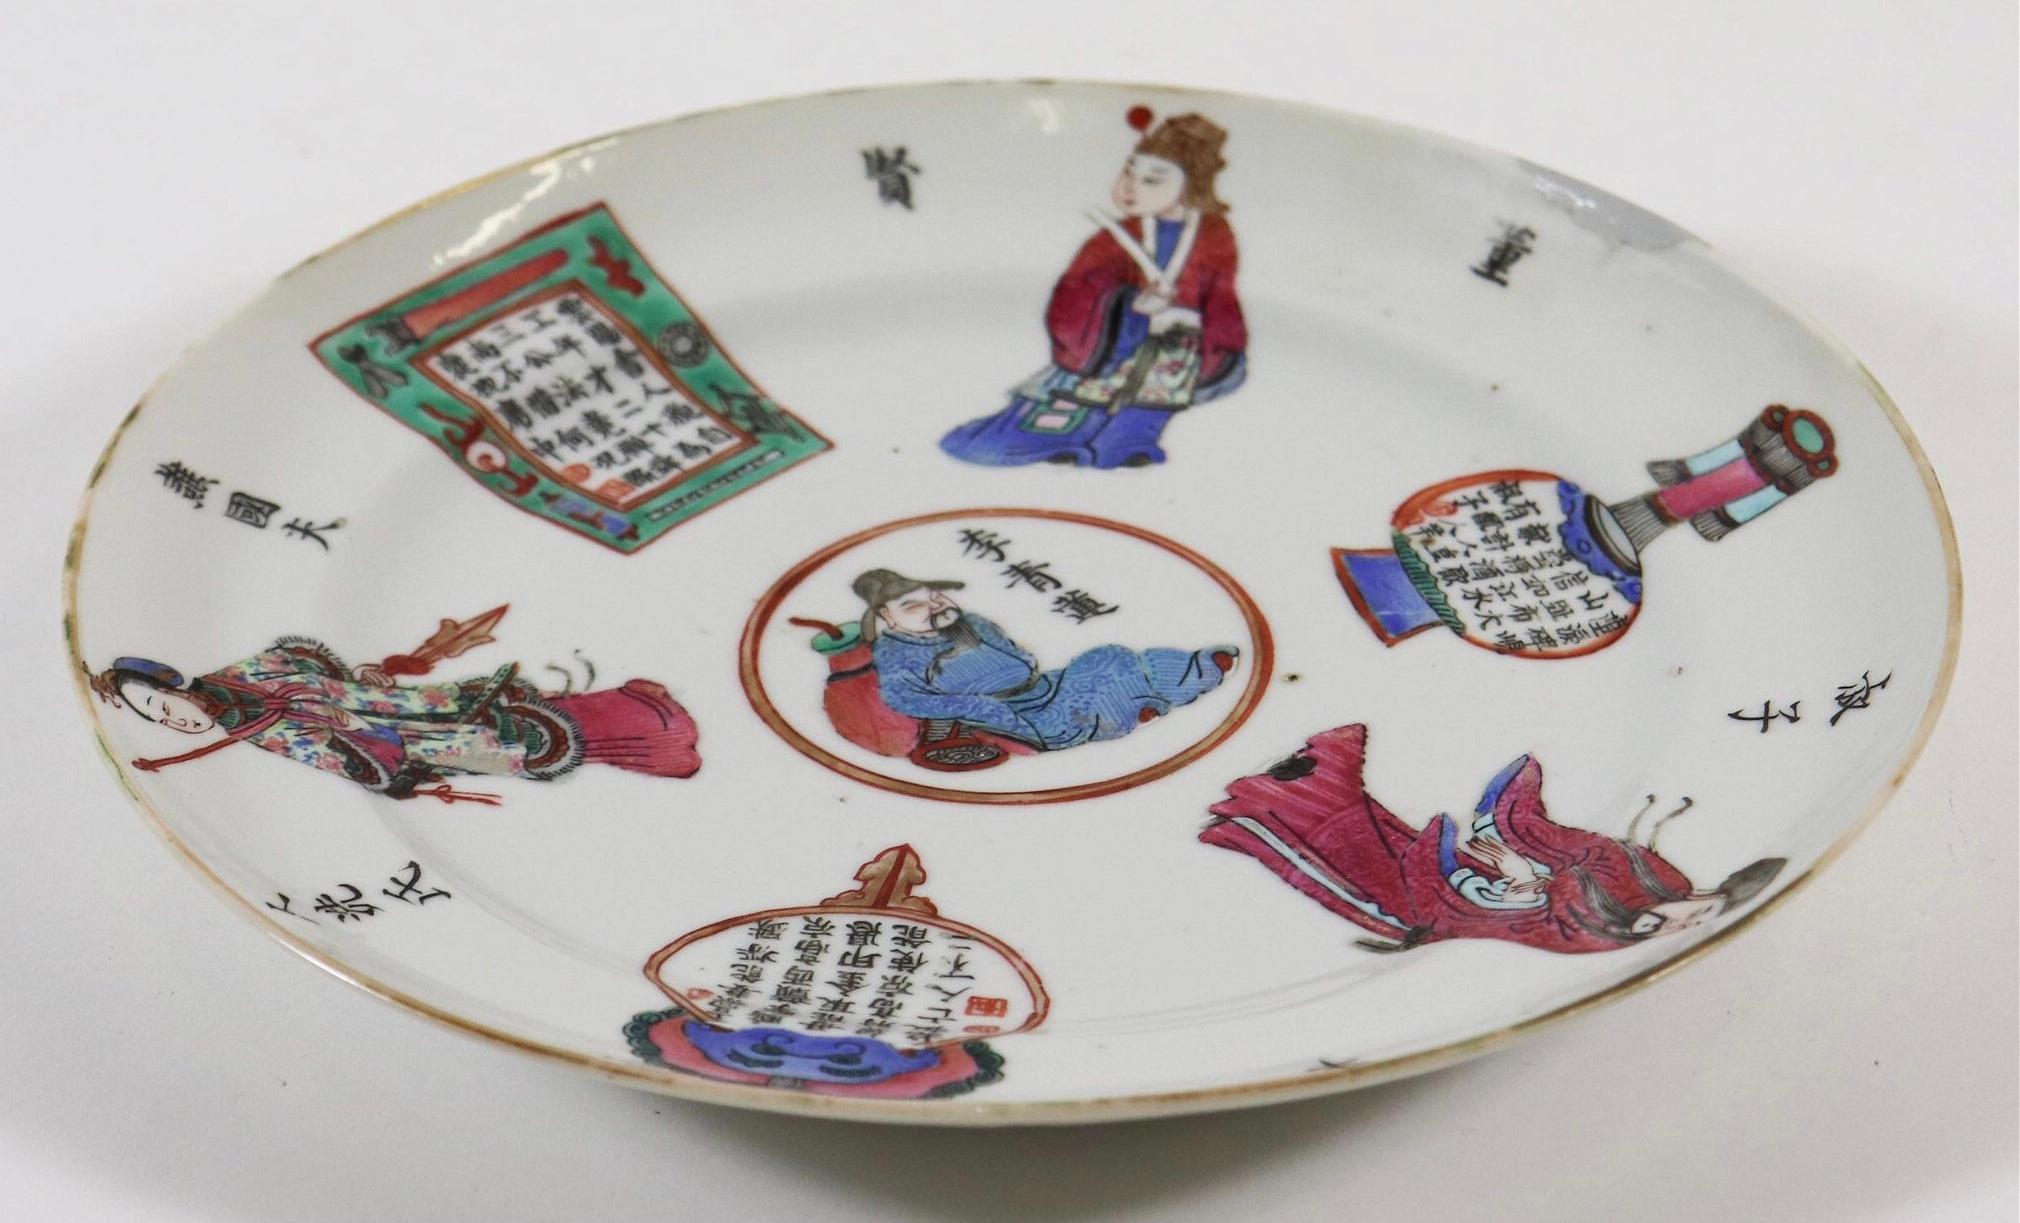 This rare Chinese porcelain plate is boldly decorated and to the top with heroic characters from the 'Wu Shuang Pu', the Table of Peerless Heroes, each accompanied by shaped and decorated panels enclosing a short calligraphy and figures.